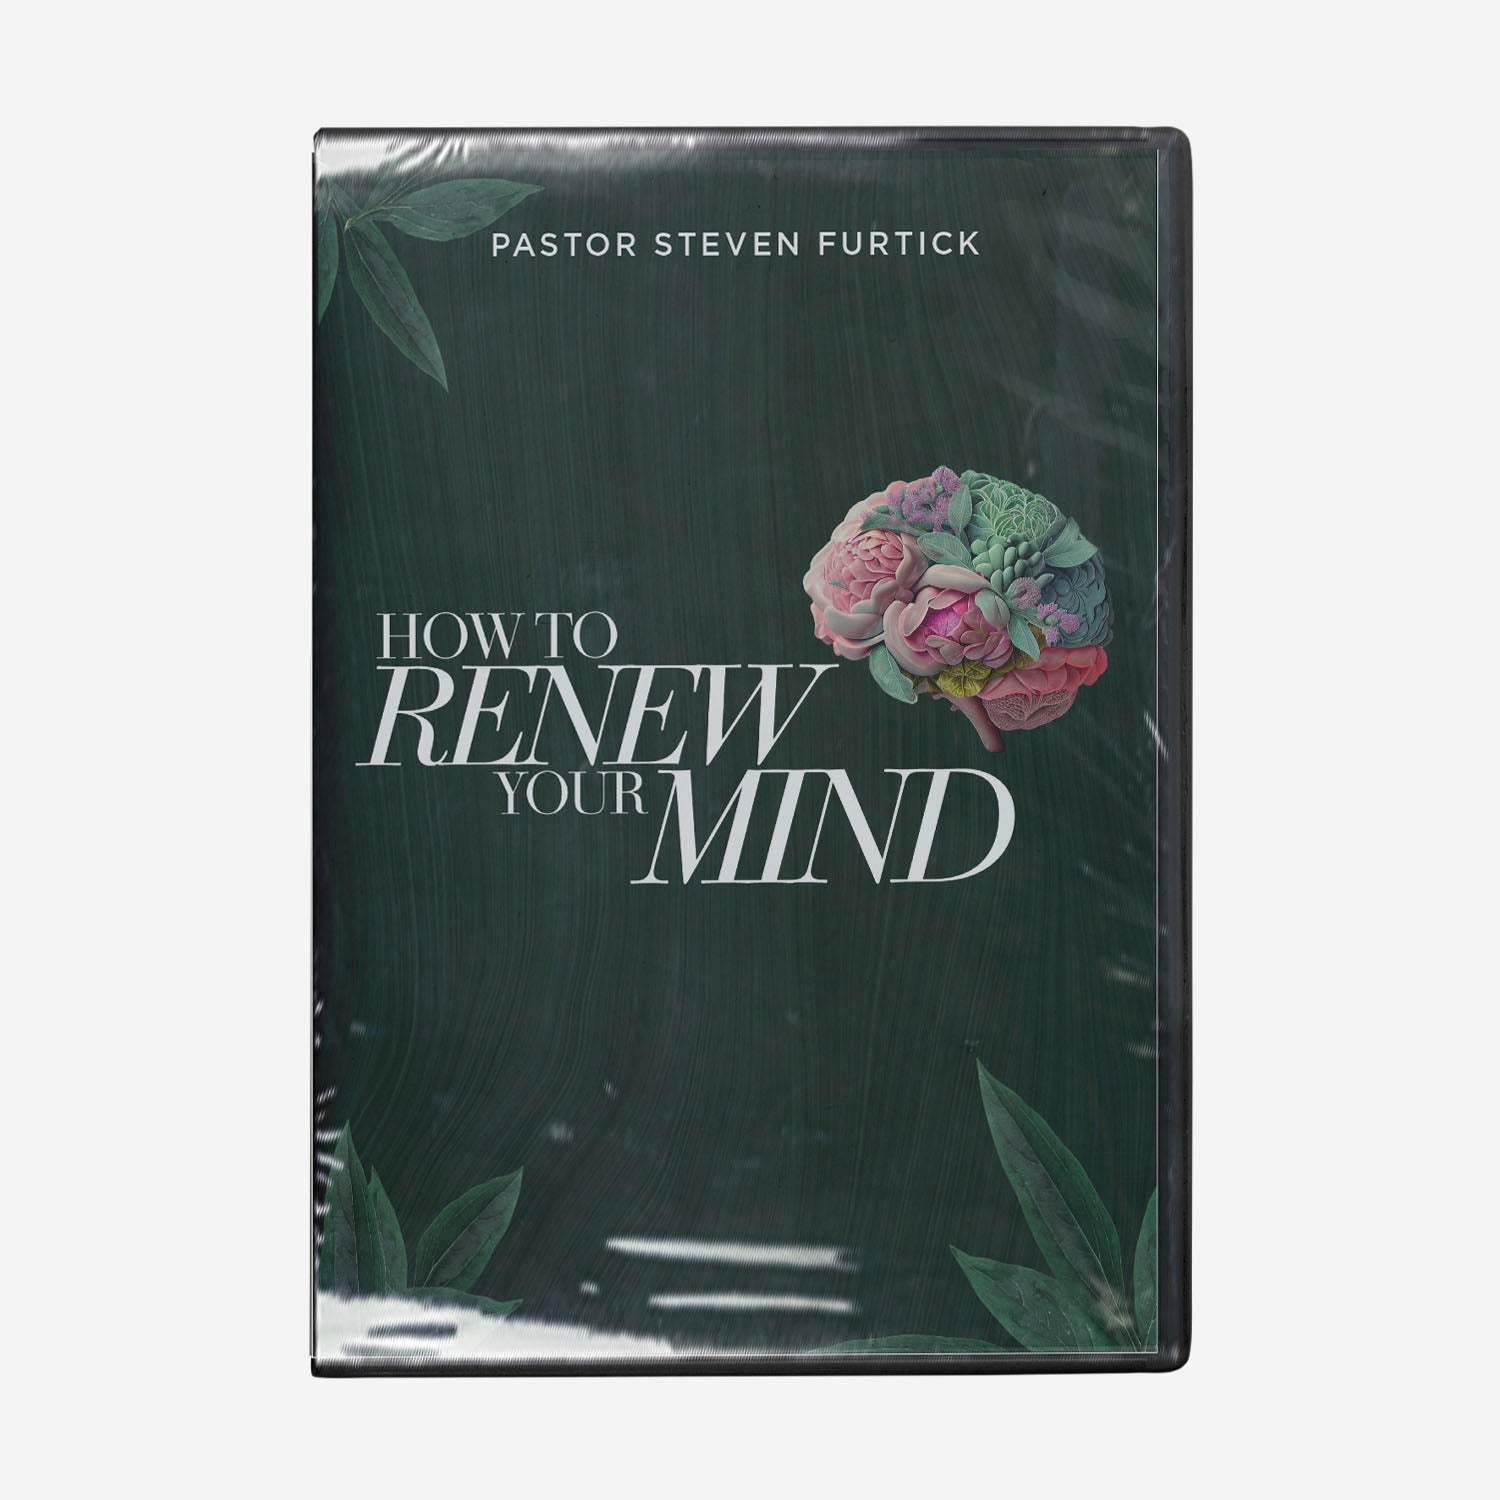 How to Renew Your Mind DVD